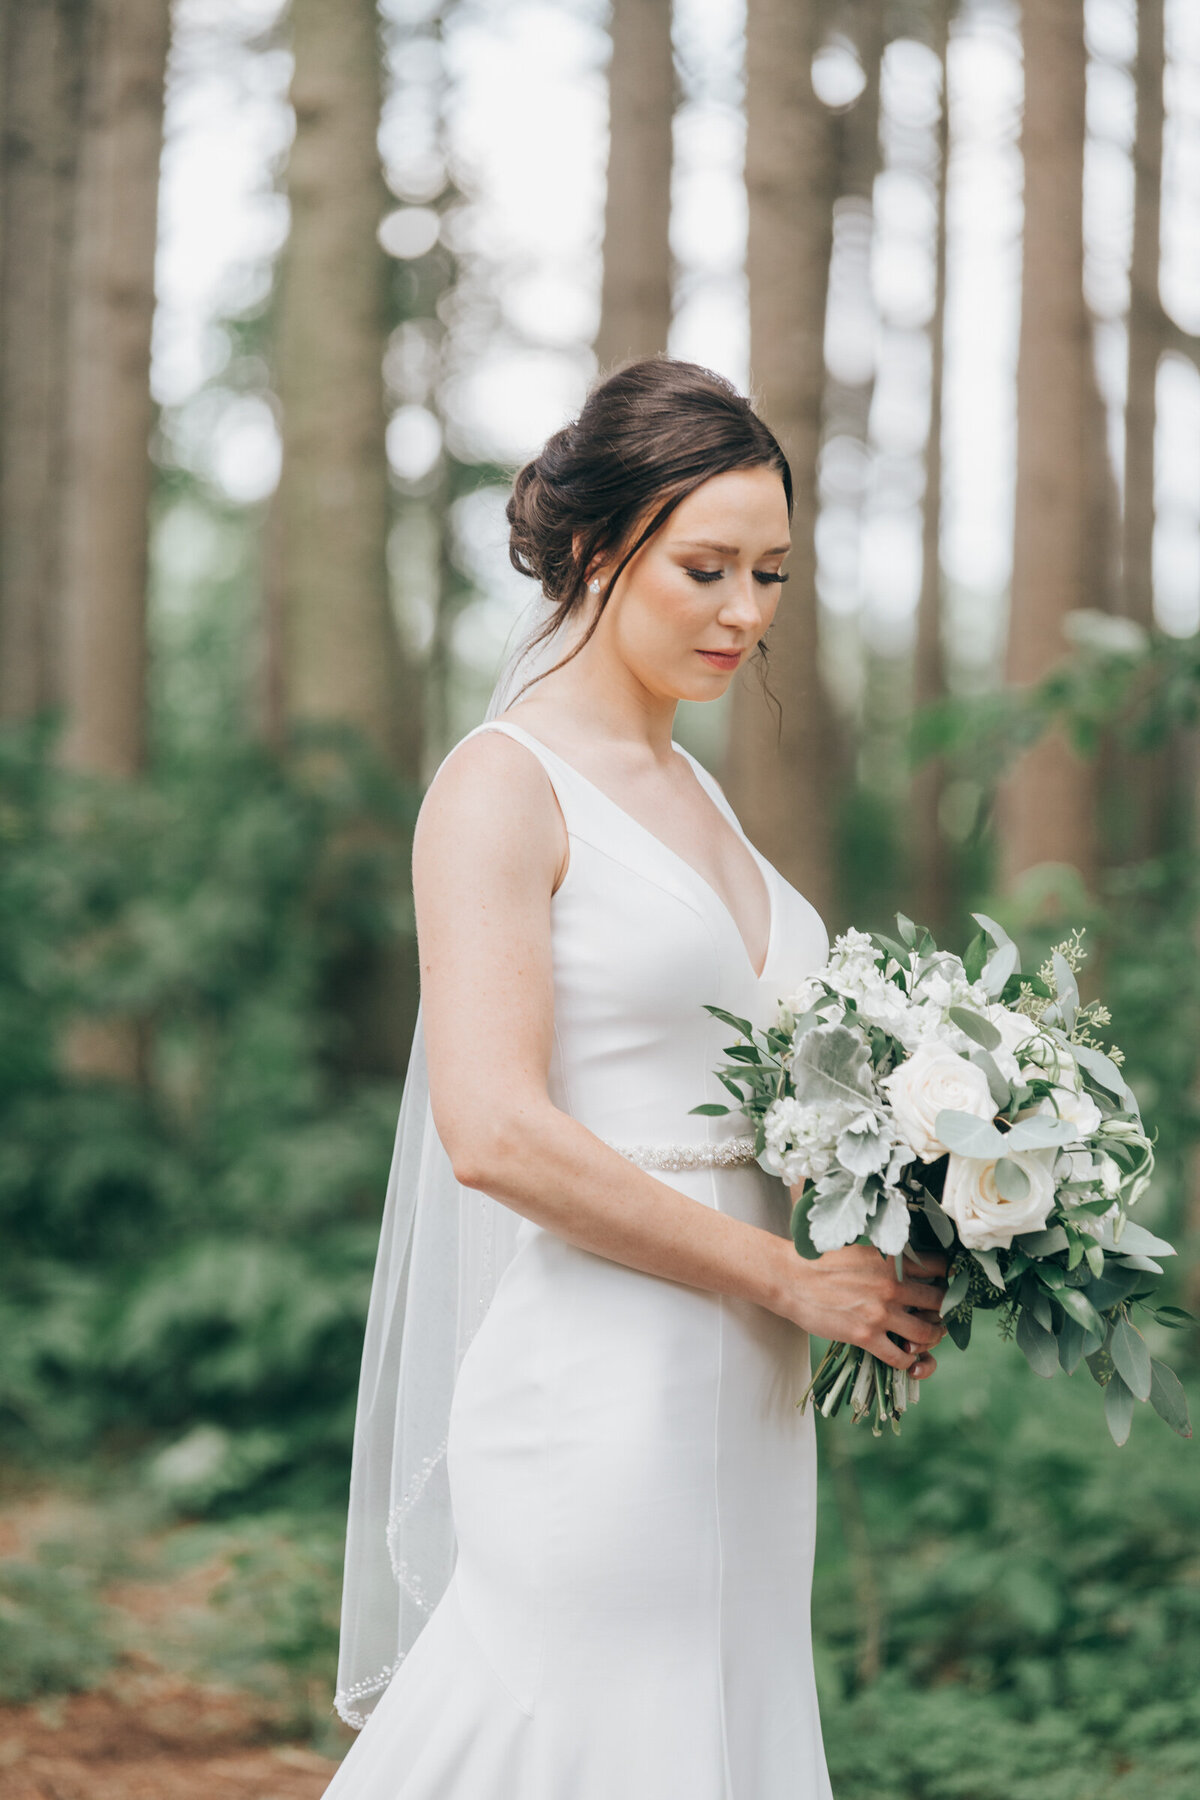 An elegant bride in a white dress looking at her beautiful wedding bouquet with white flowers